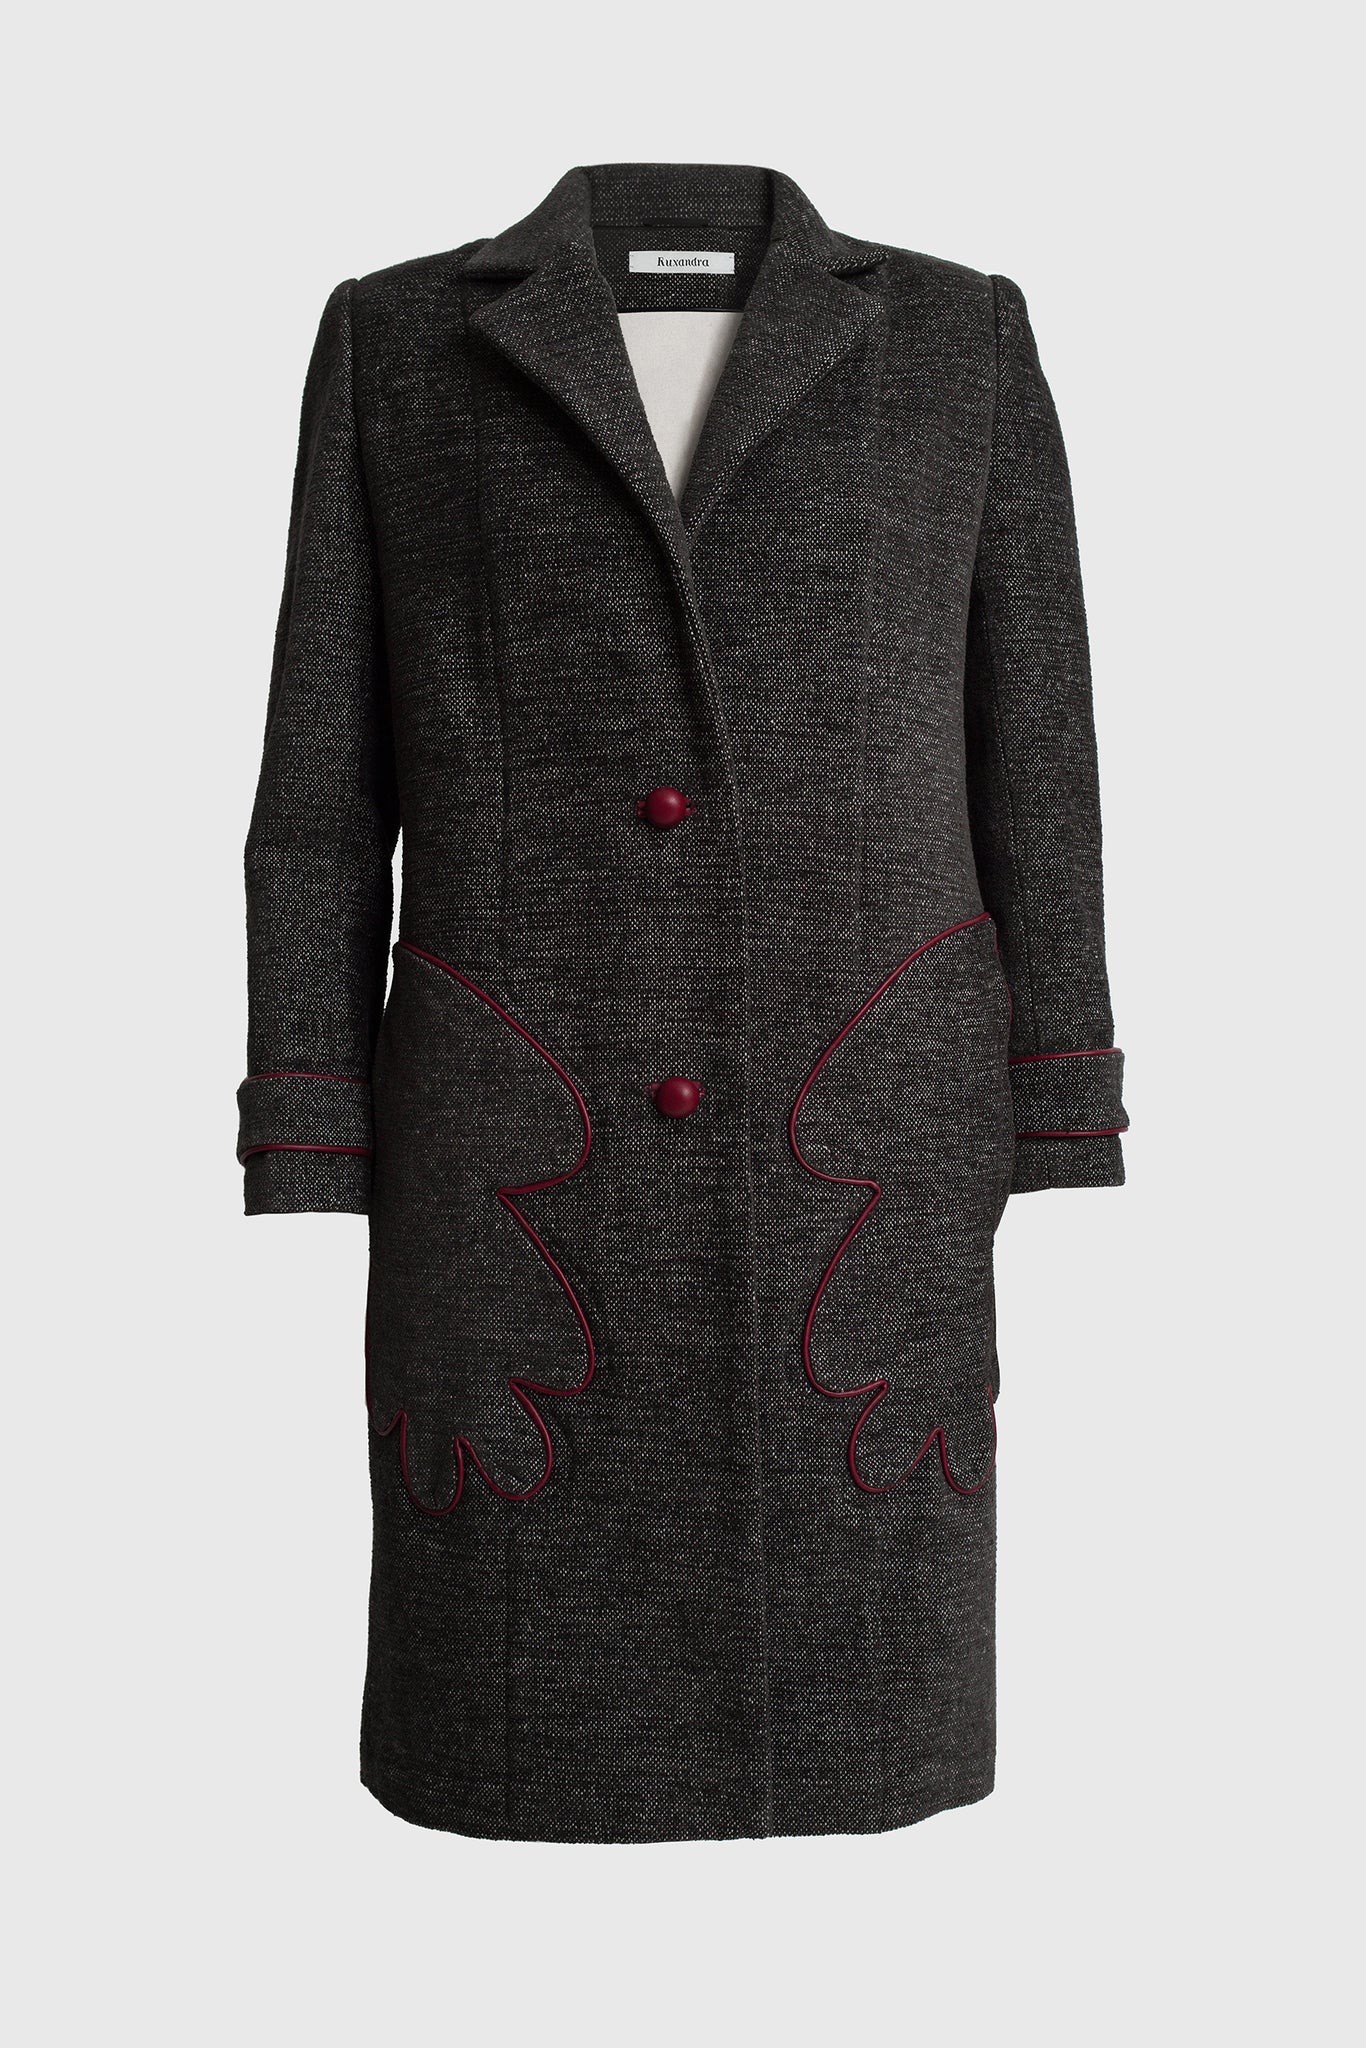 women's tailored coat, detailed with leather, leather covered buttons, hands shaped pockets on the outside, red outlines, pixel black cotton coat, cuffs, mid-length, lined